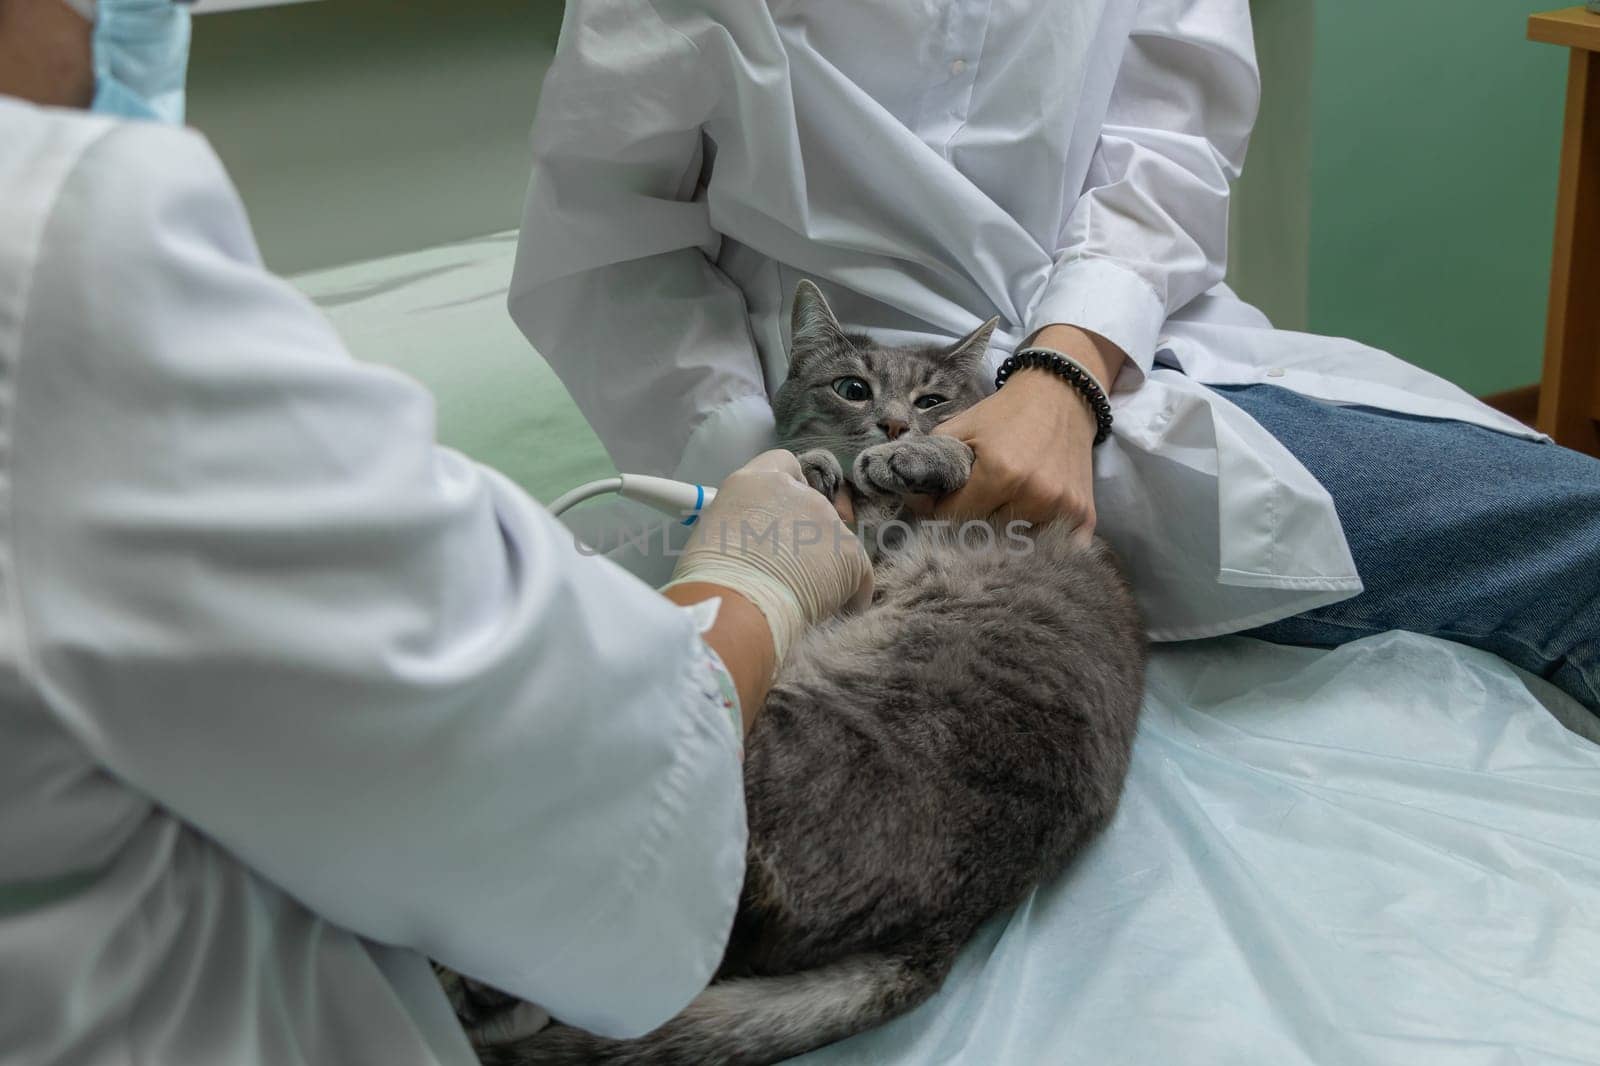 a veterinarian wearing white medical gloves performs an ultrasound on a cat. gray cat at the veterinarian's appointment. soft focus